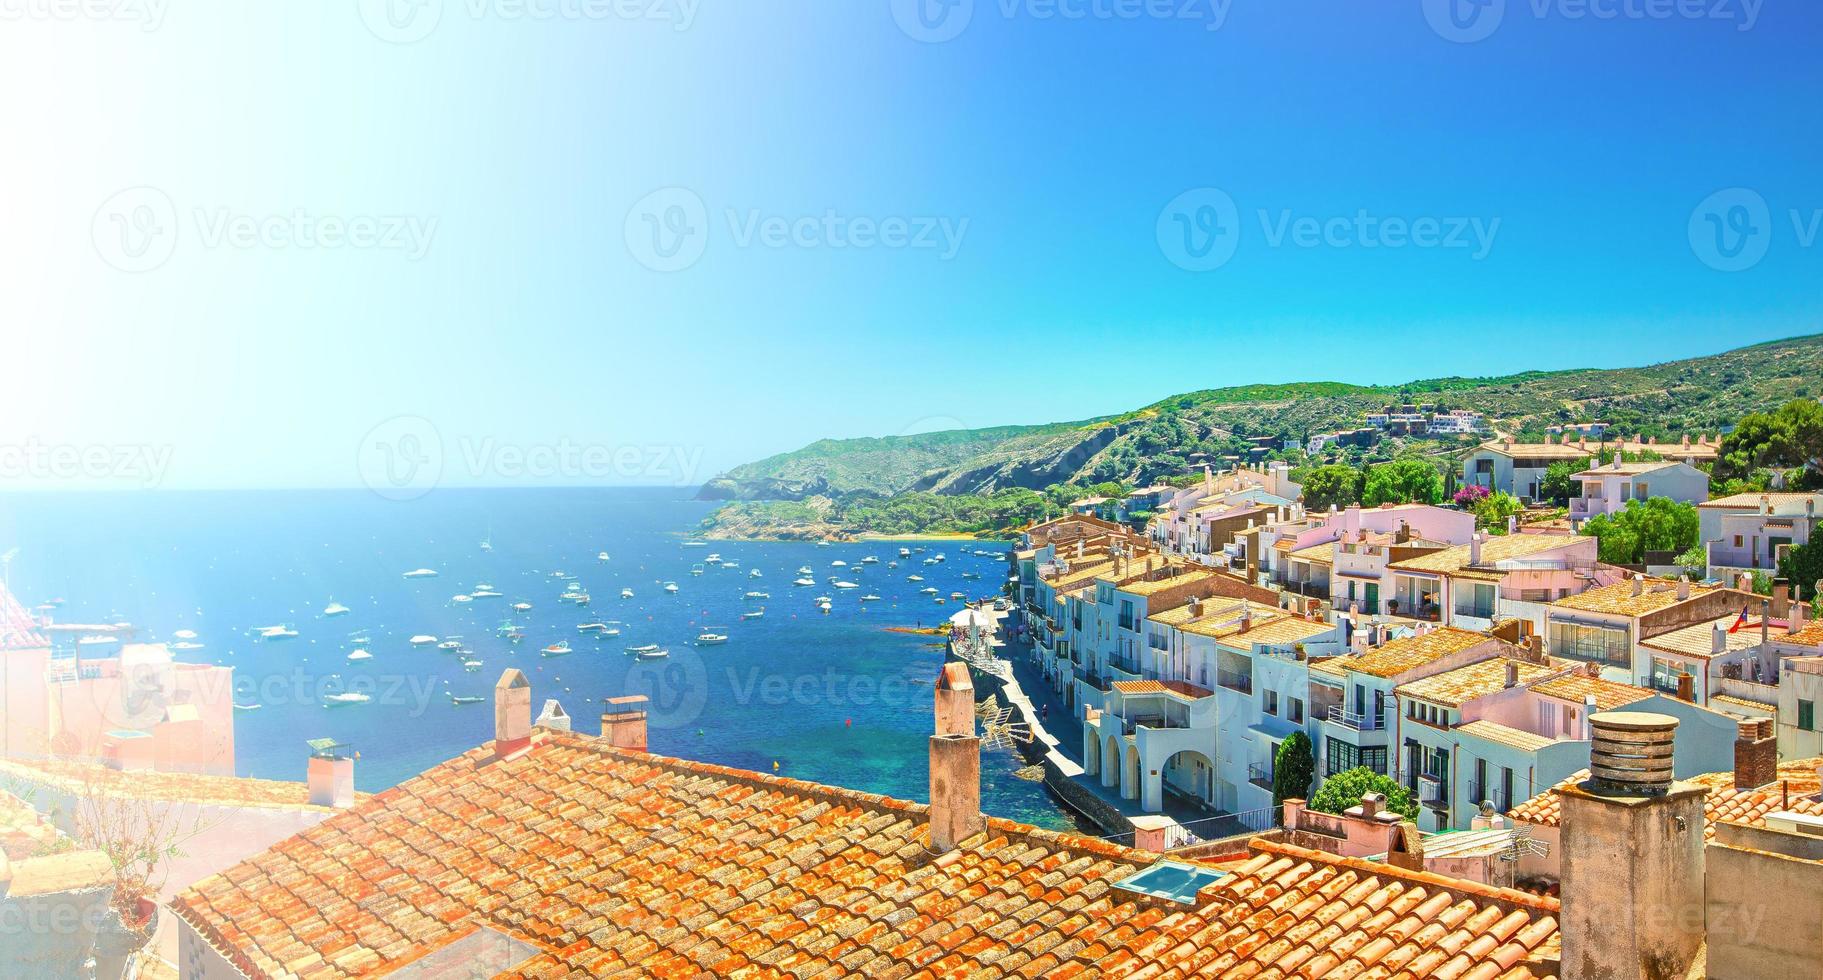 Cadaques on the Costa Brava. The famous tourist city of Spain. Nice view of the sea. City landscape. photo